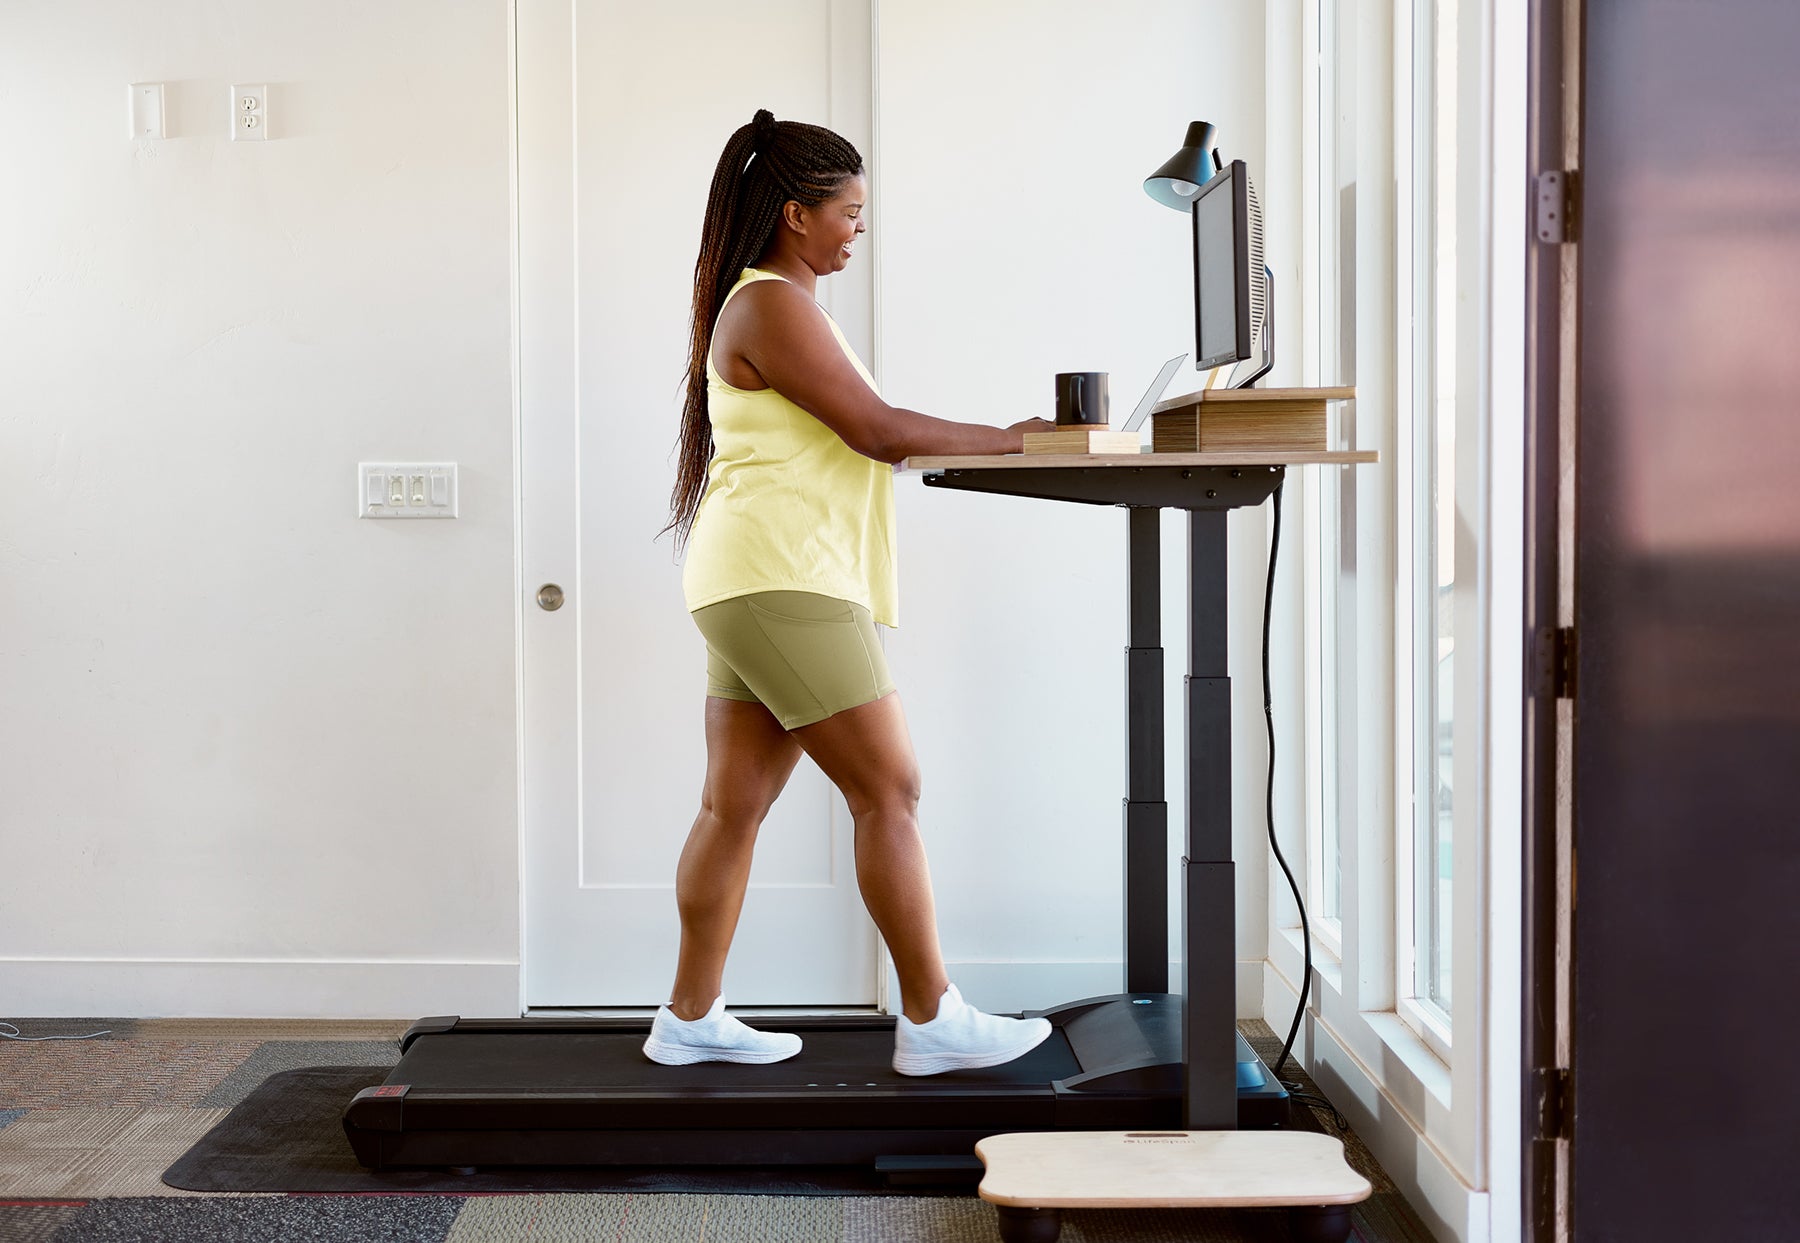 LifeSpan Business Omni Desk Blog - How to Stay Physically and Mentally Fit